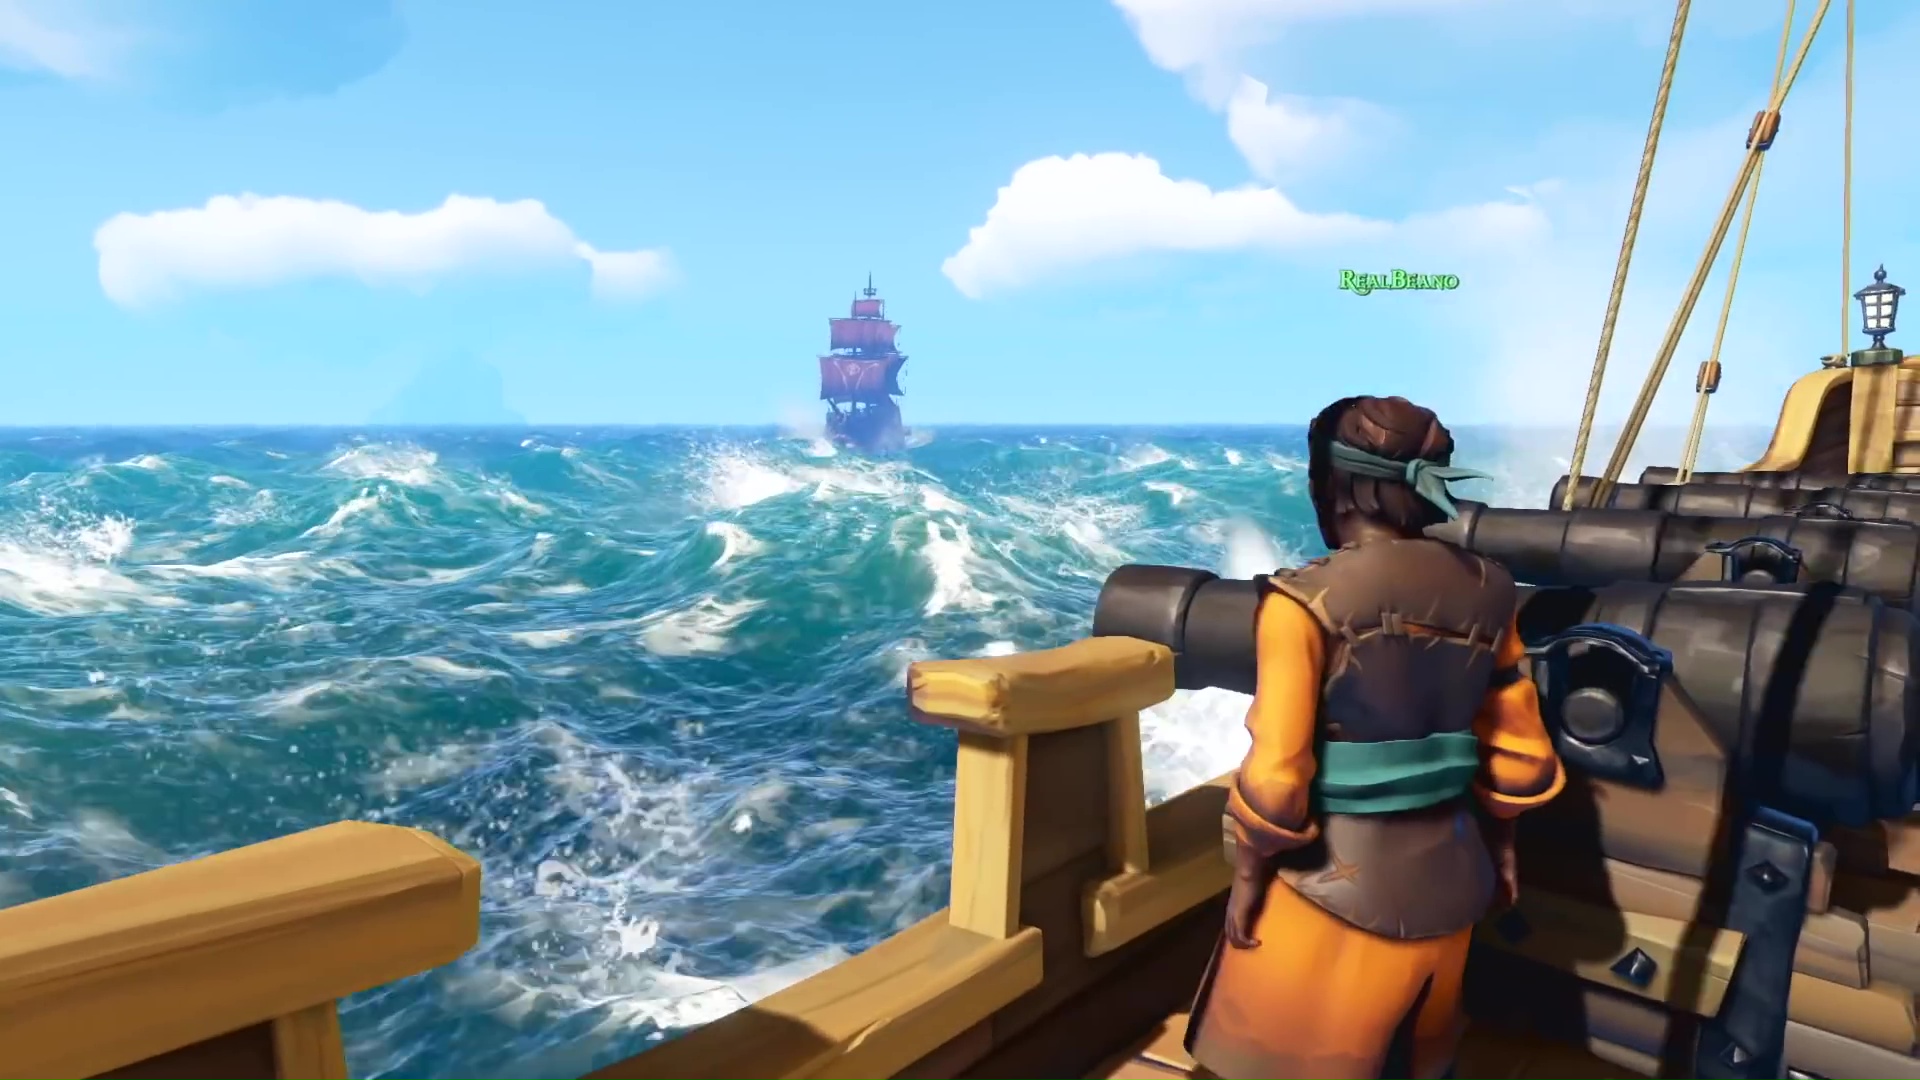 I read a book Persistence Develop Rare's Xbox One Pirate Game Sea of Thieves Gets New Gameplay Details -  GameSpot